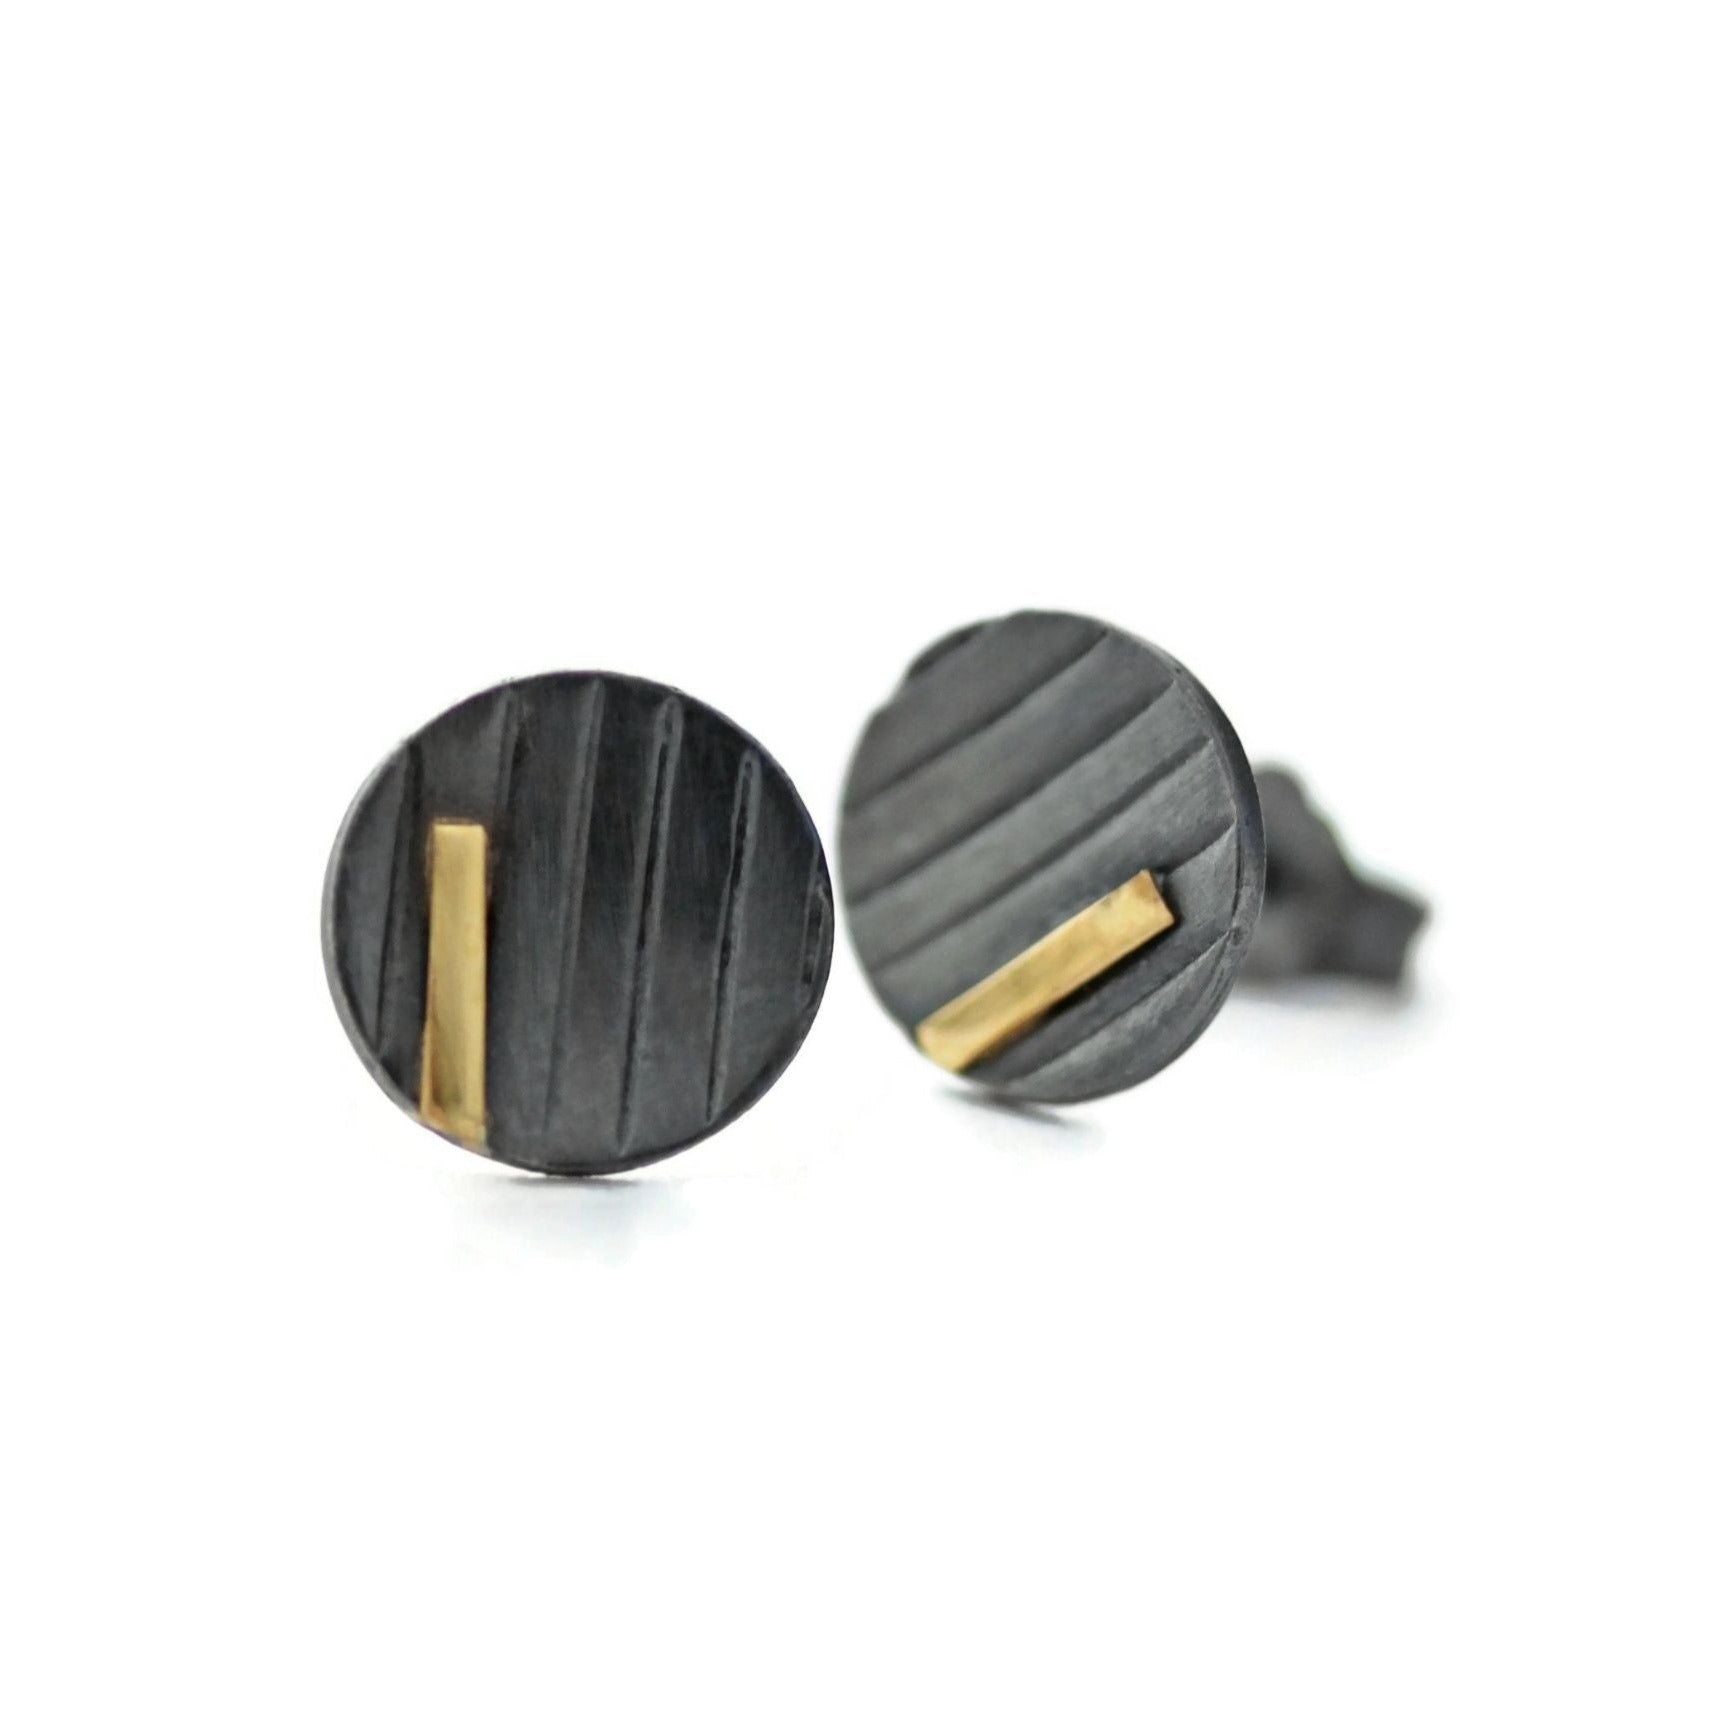 Disc earrings in oxidized silver and gold by Jen Lesea Designs